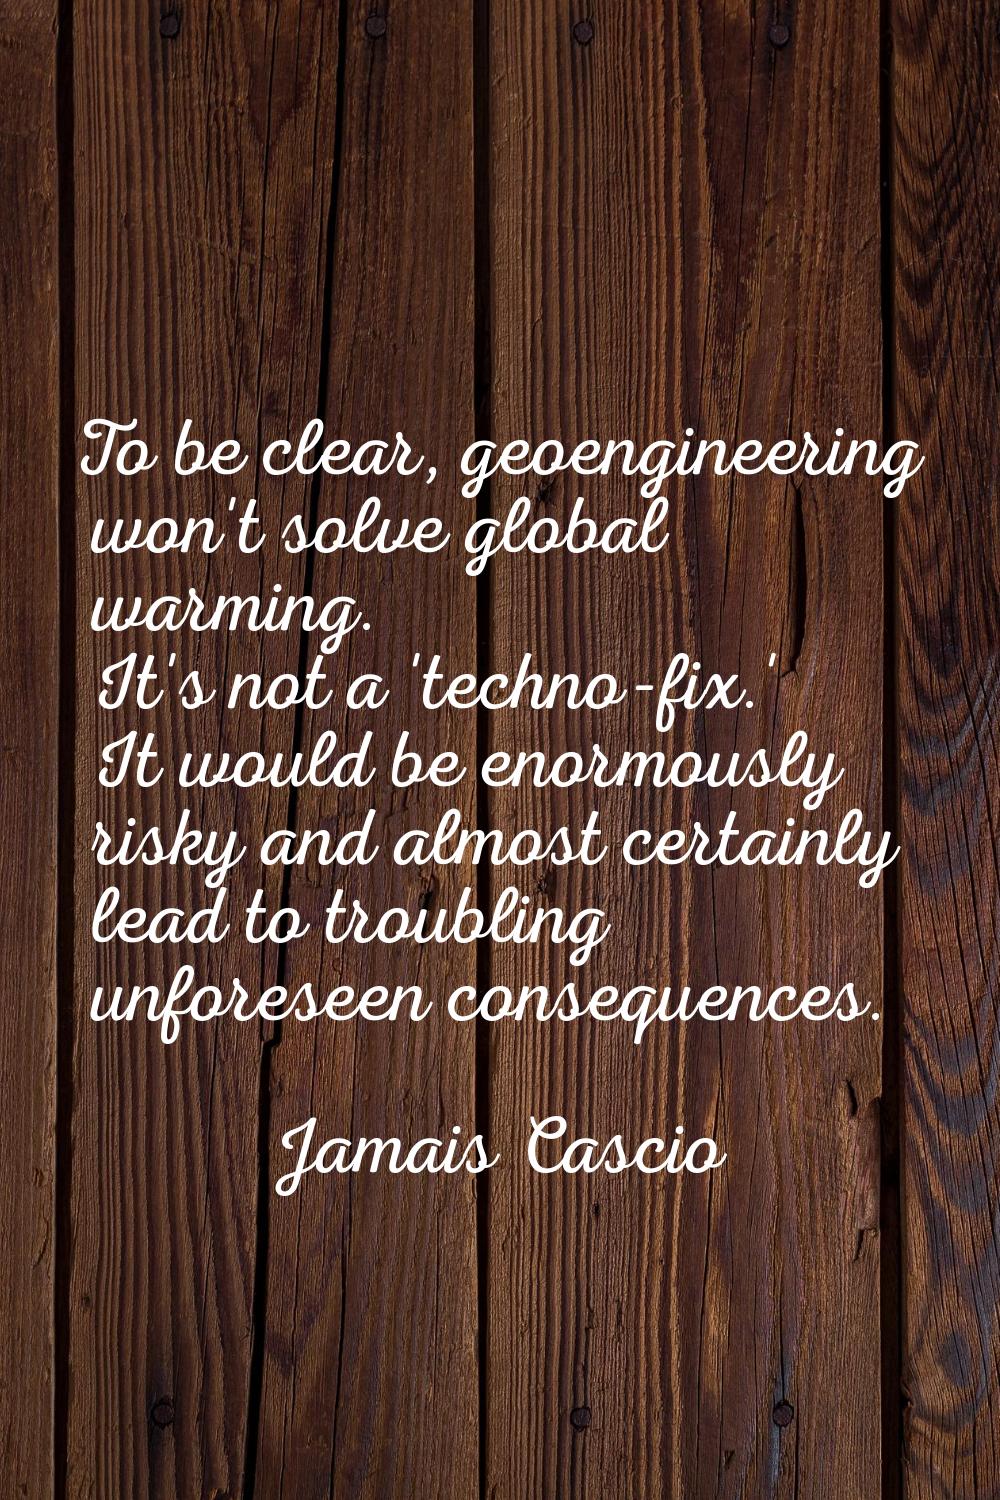 To be clear, geoengineering won't solve global warming. It's not a 'techno-fix.' It would be enormo